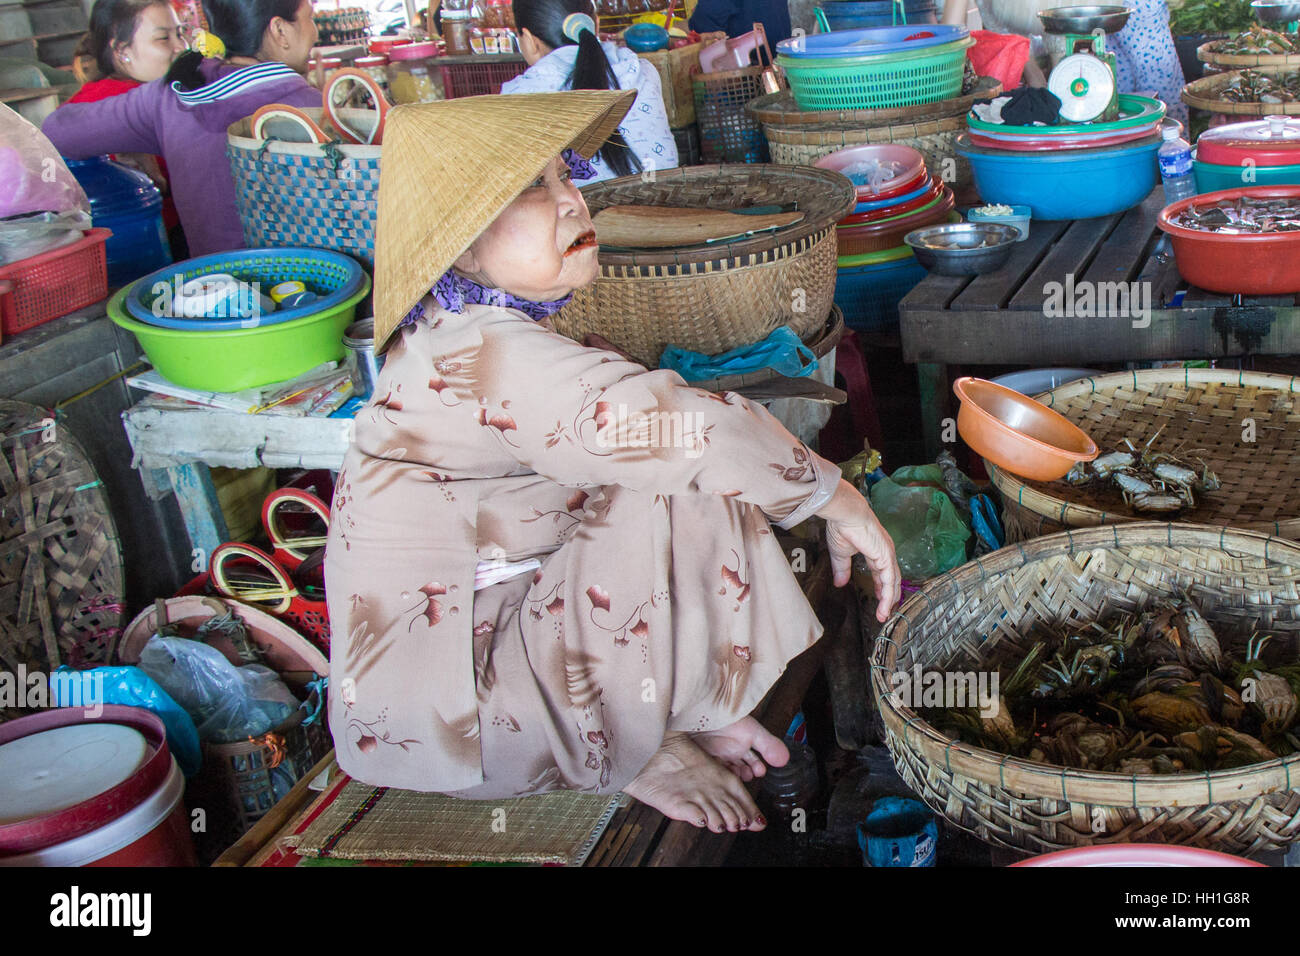 An aged vendor at the fish market wearing the conical hat and silk pyjamas, selling her wares. Stock Photo